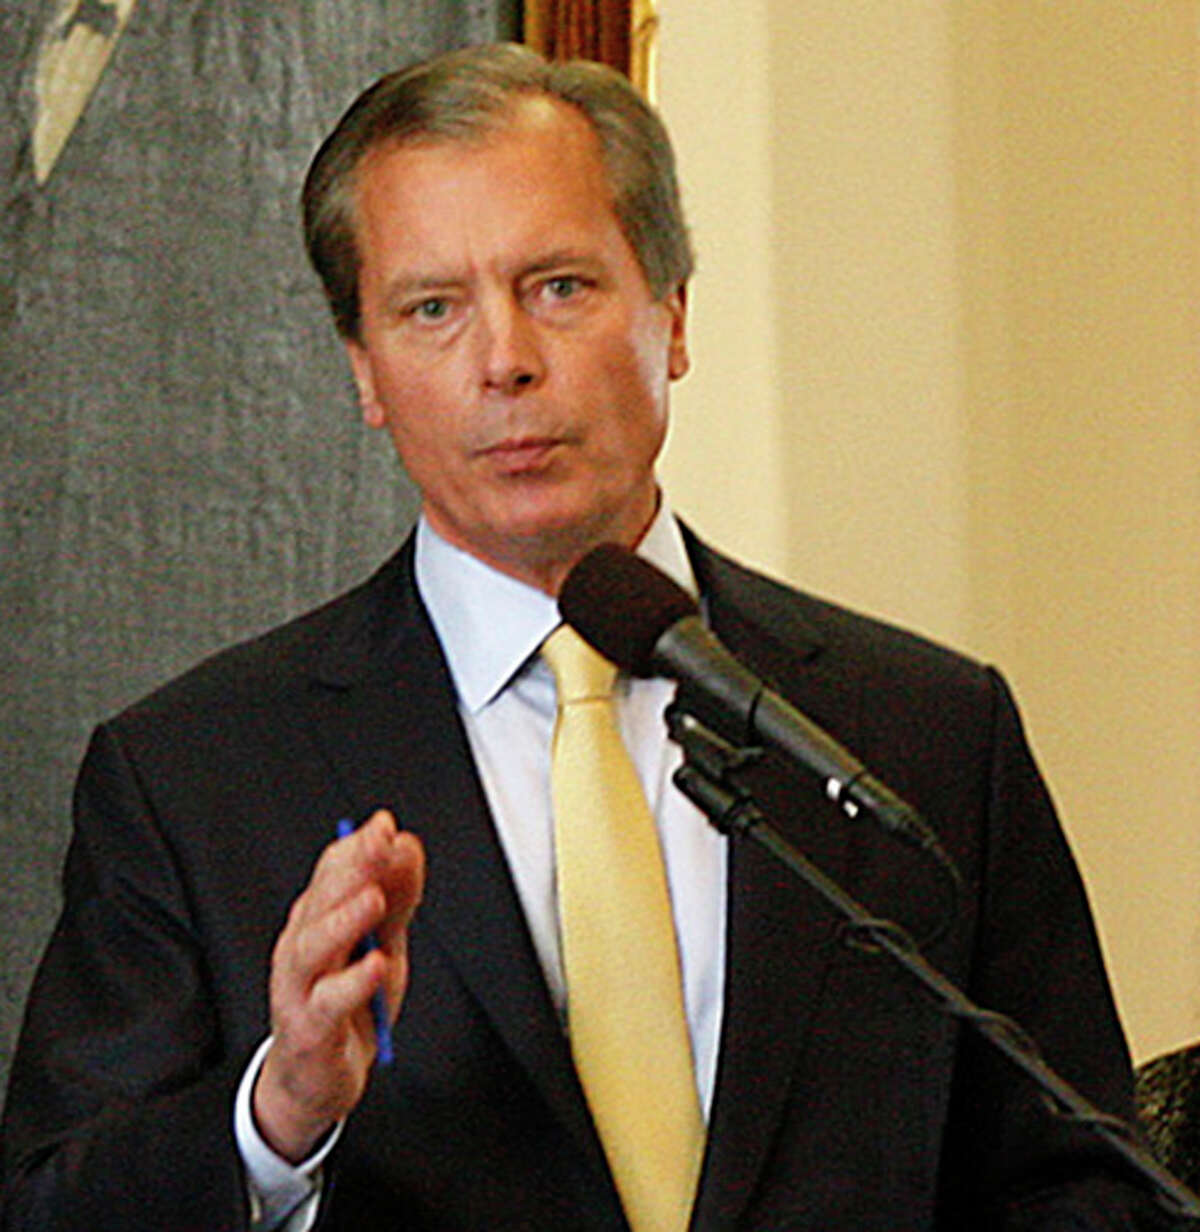 Lt. Gov. David Dewhurst, seen on Jan. 24, 2011, is expected by midweek to make his official announcement that he'll be seeking the Senate seat held by Kay Bailey Hutchison.